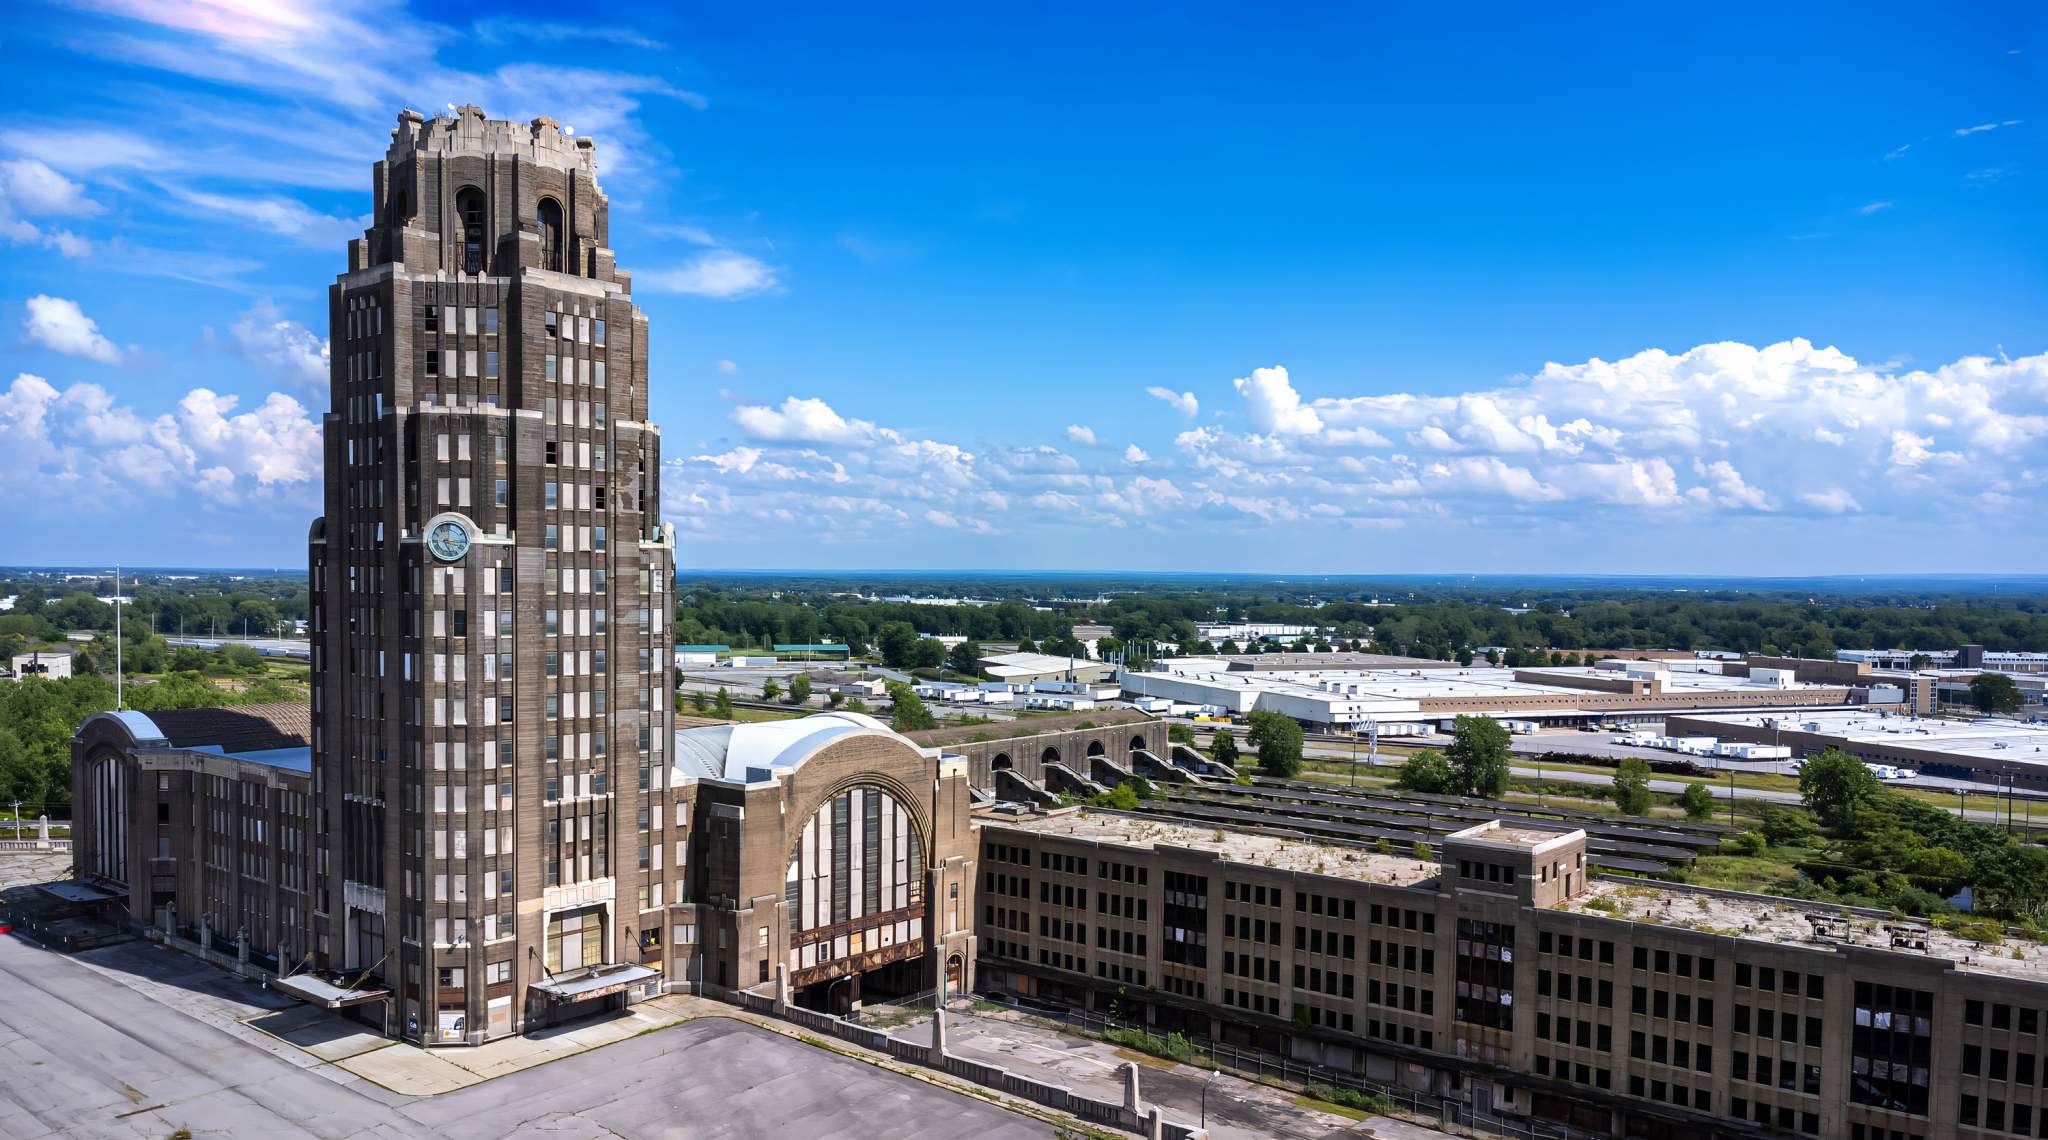 Aerial Photography of Buffalo's Central Terminal